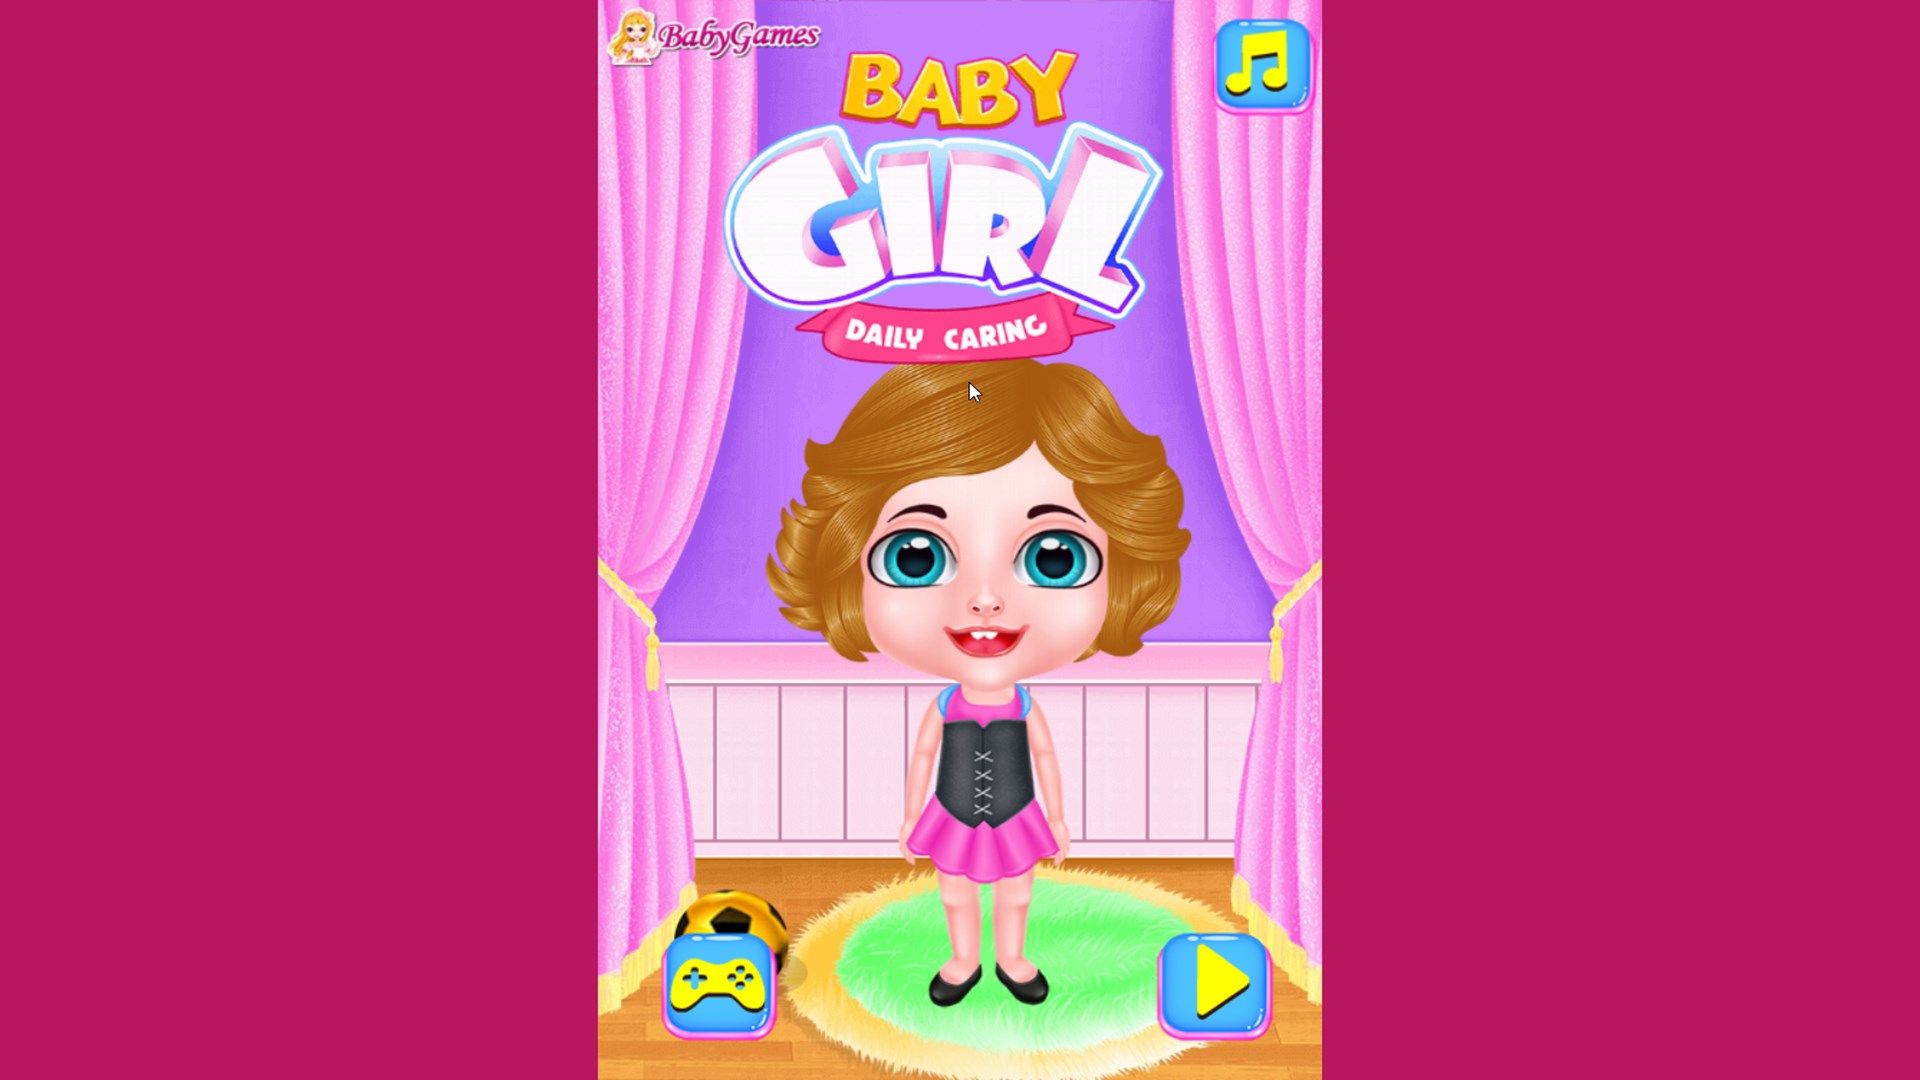 Baby Girl Daily Care